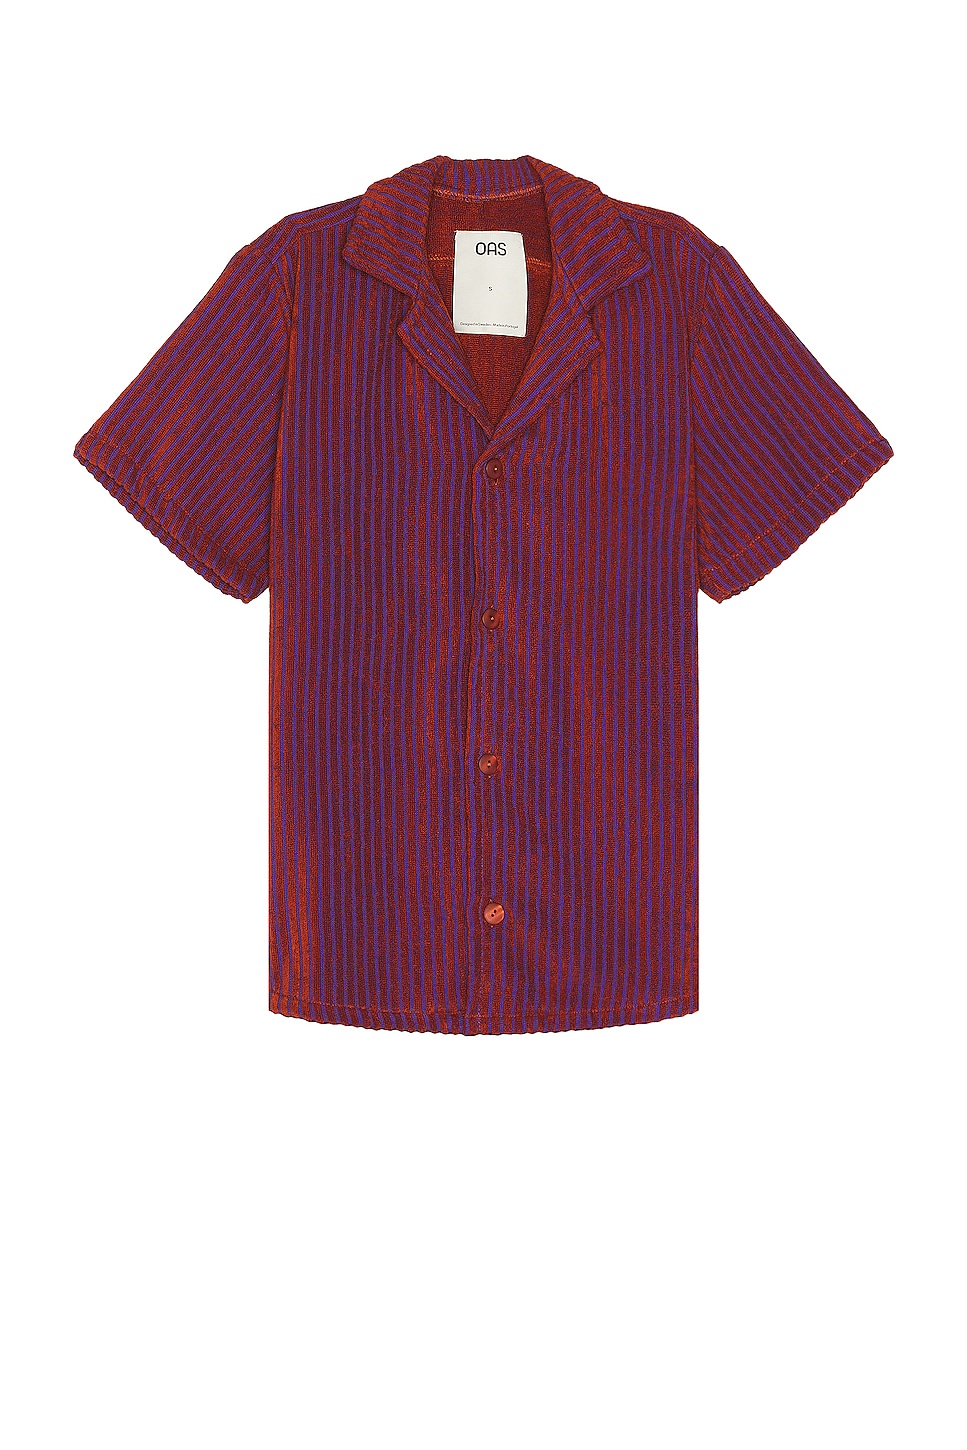 Image 1 of OAS Deep Cut Cuba Terry Shirt in Rusty Red